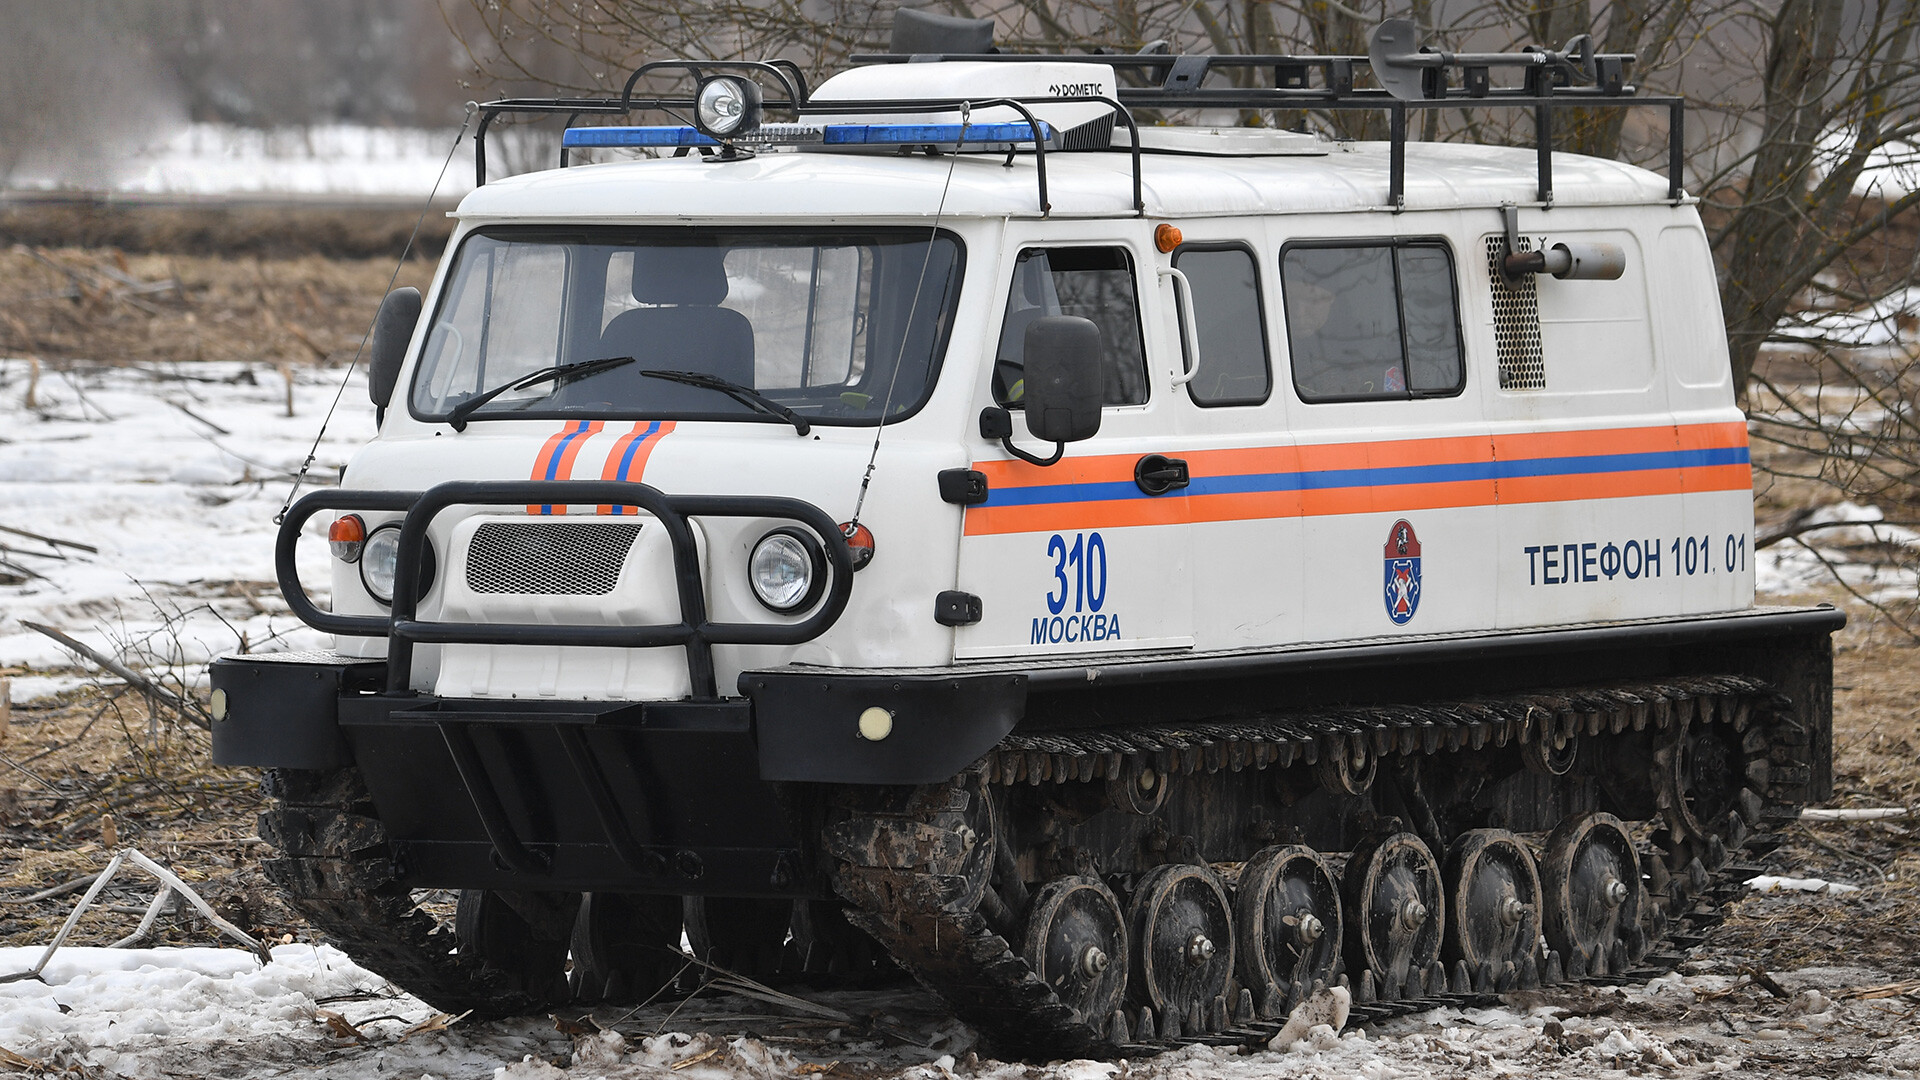 This UZOLA works for Moscow's rescue team of the Troitsky administrative district.